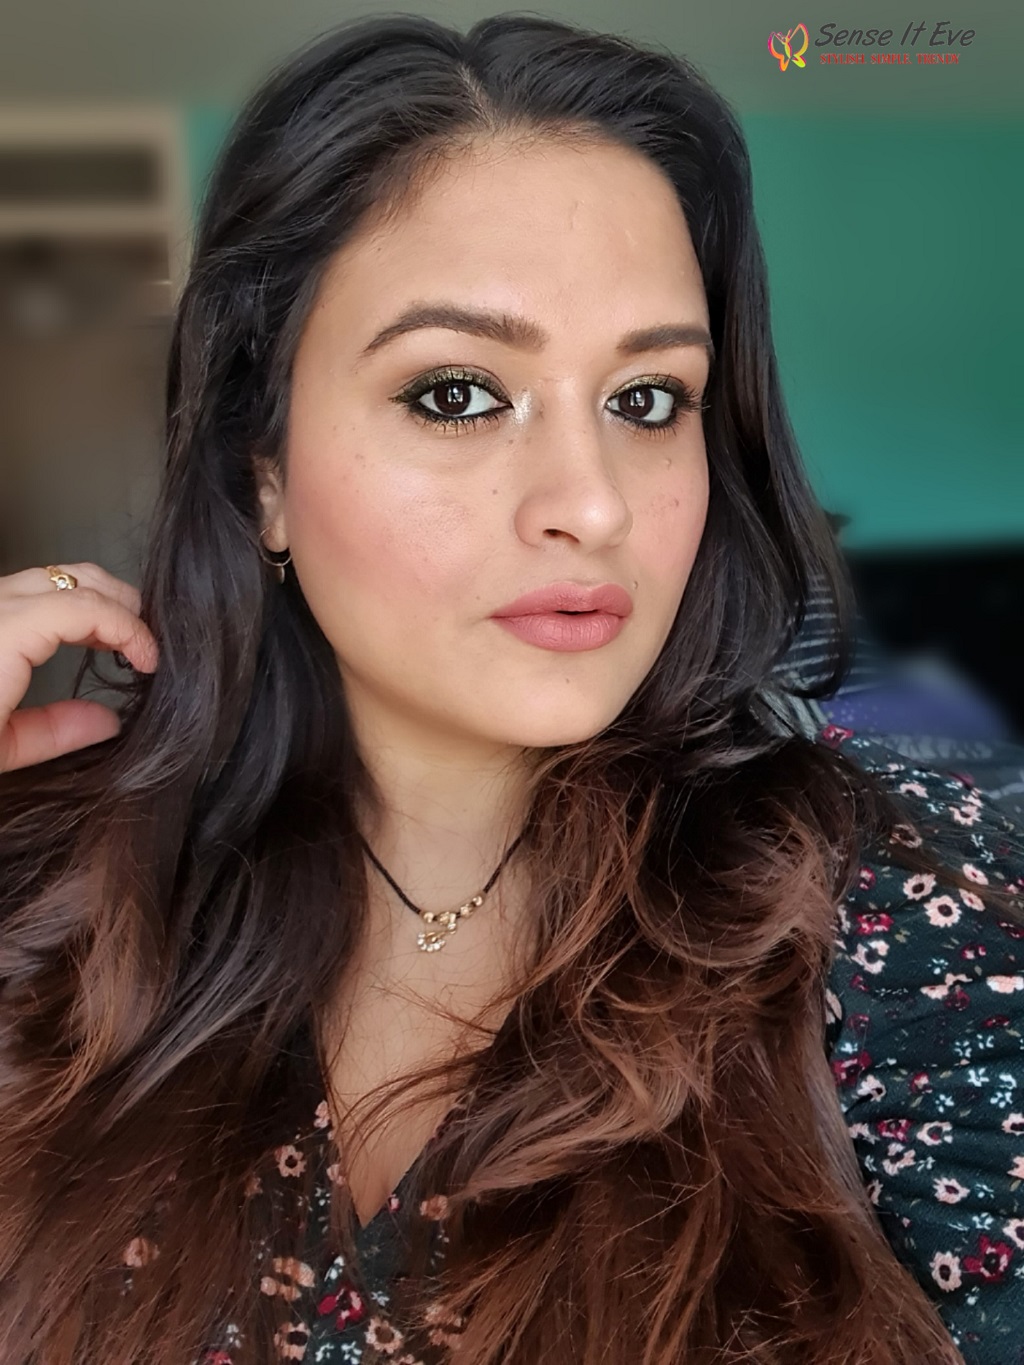 Lakme Absolute Shine Line Liquid Liner Liquid Gold FOTD Sense It Eve Lakme Absolute Shine Line Eye Liners : Review & Swatches